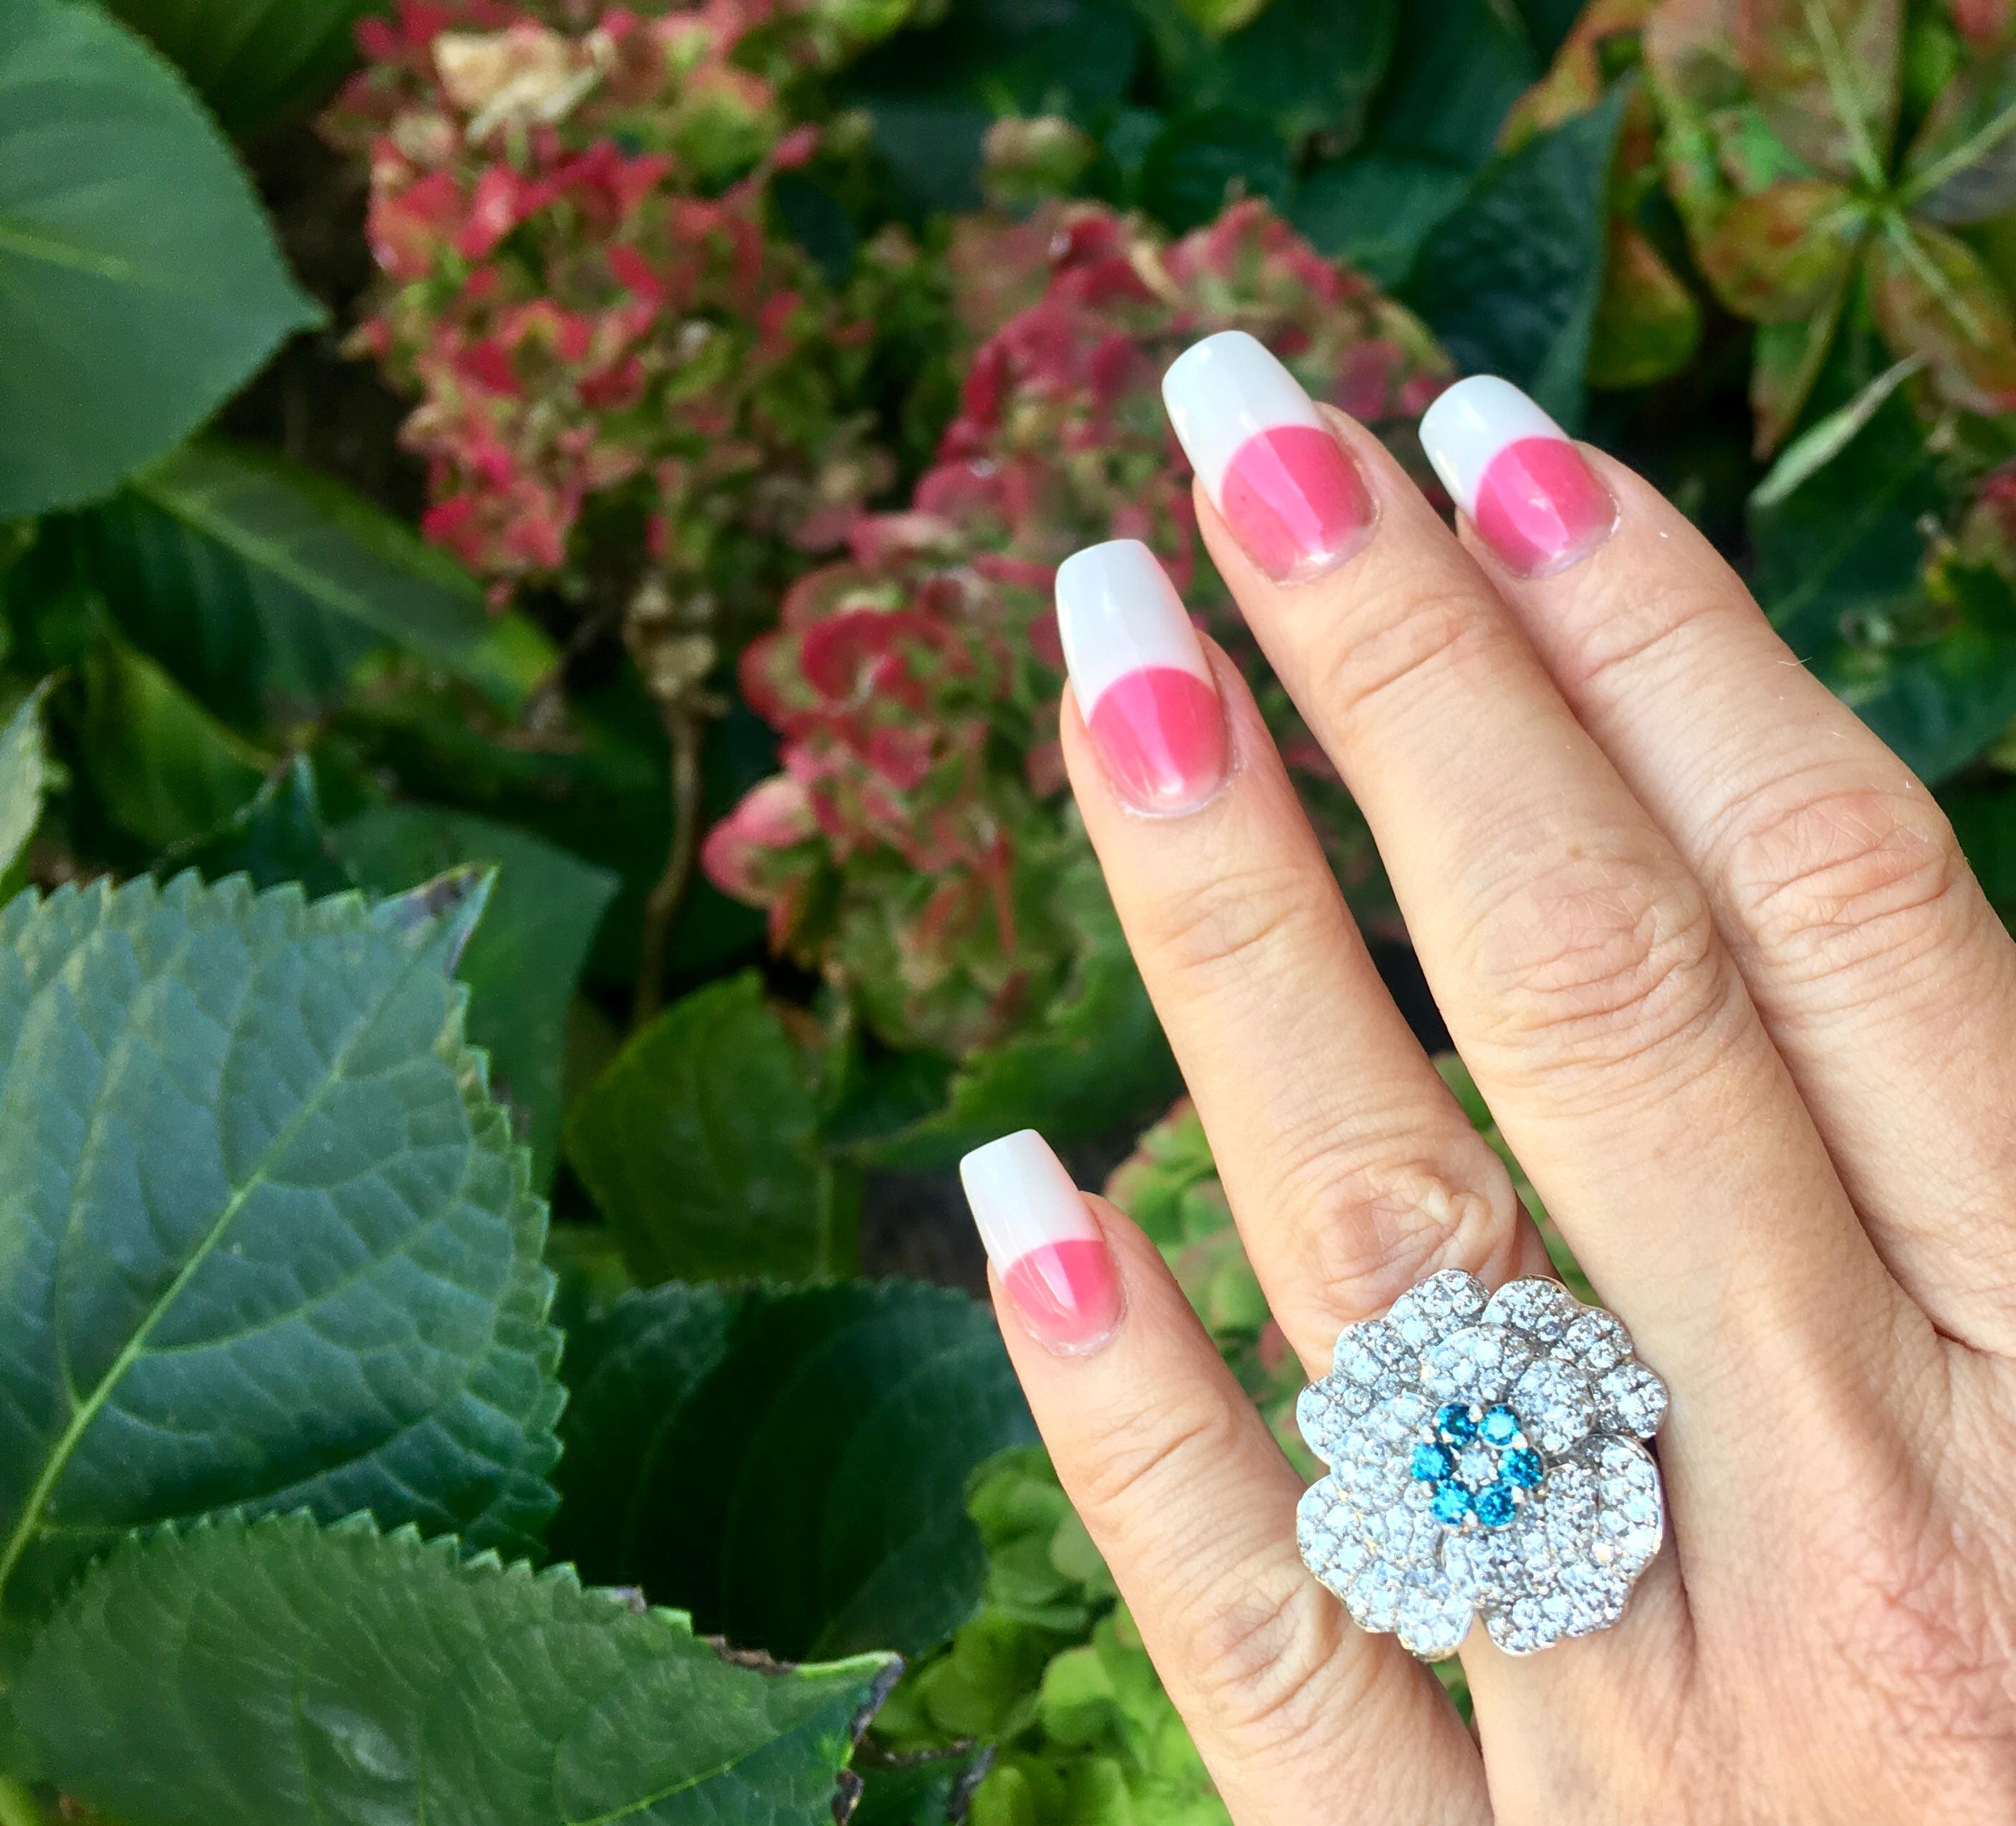 Magnificently styled and stunning in real life, 18 karat white gold estate cocktail ring in the shape of a 3 dimensional camellia flower features approximately 213 round brilliant, prong set white diamonds and 6 blue diamonds.

213 white diamonds in